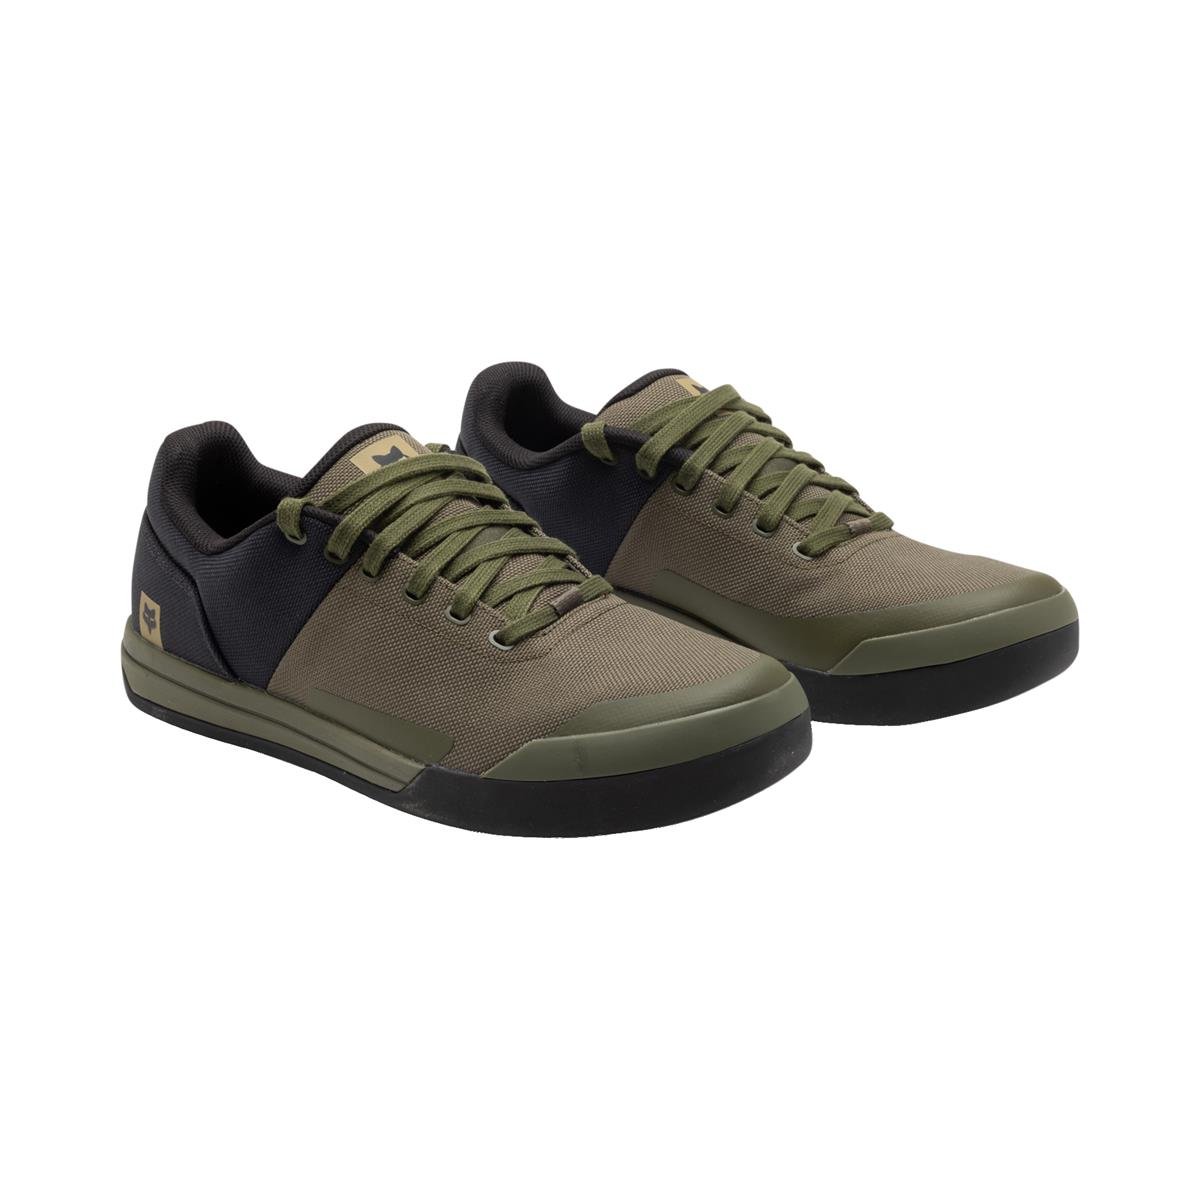 Fox MTB Shoes Union Canvas Olive Green